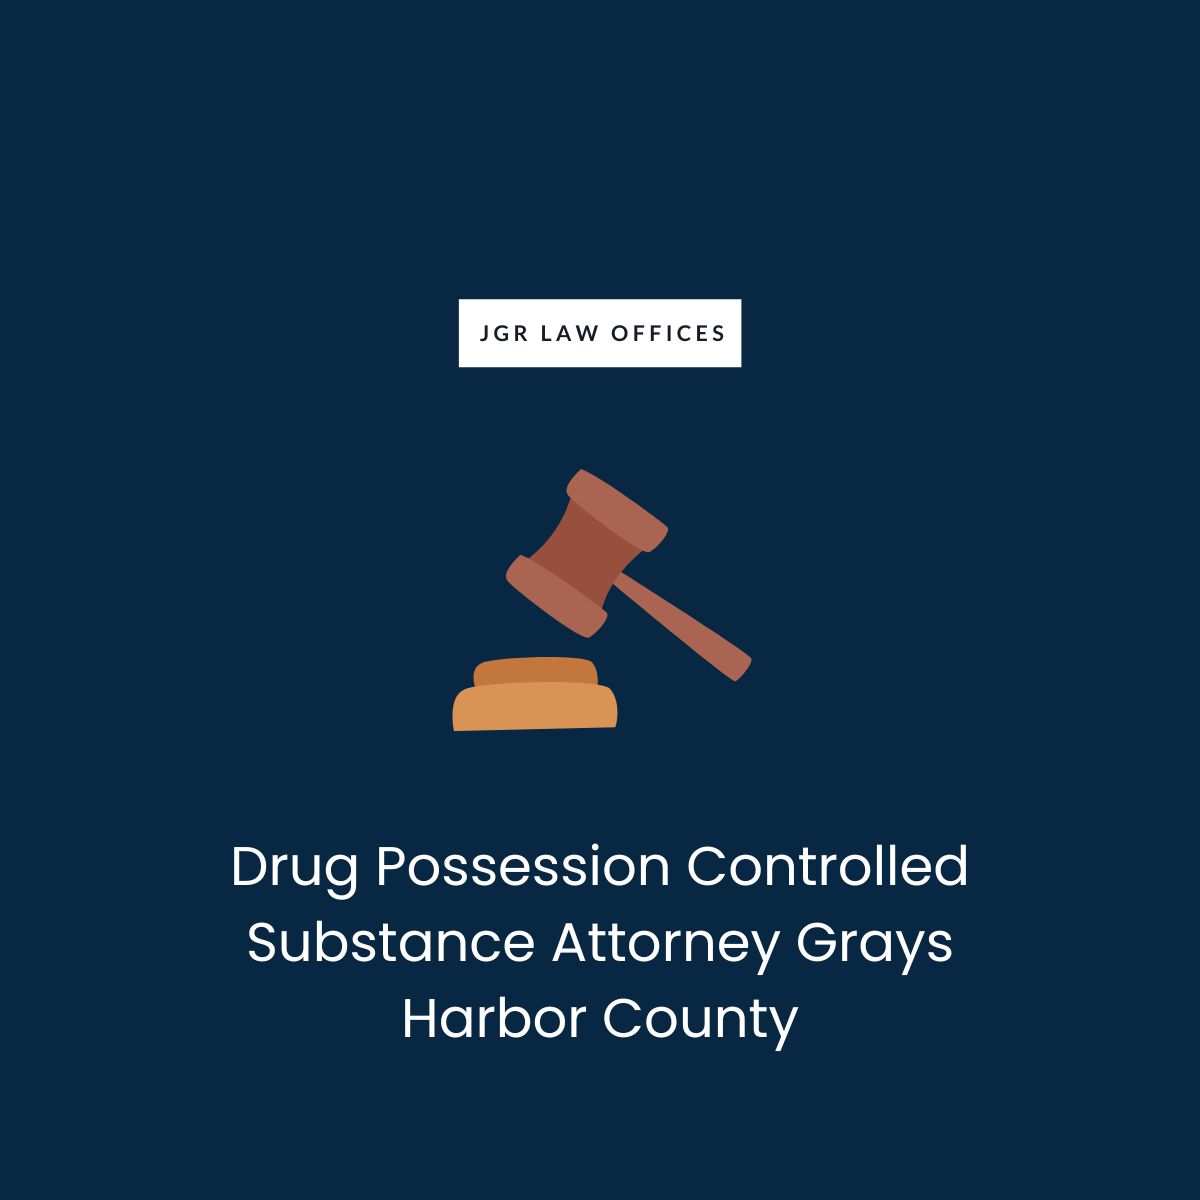 Drug Possession Controlled Substance Attorney Grays Harbor County